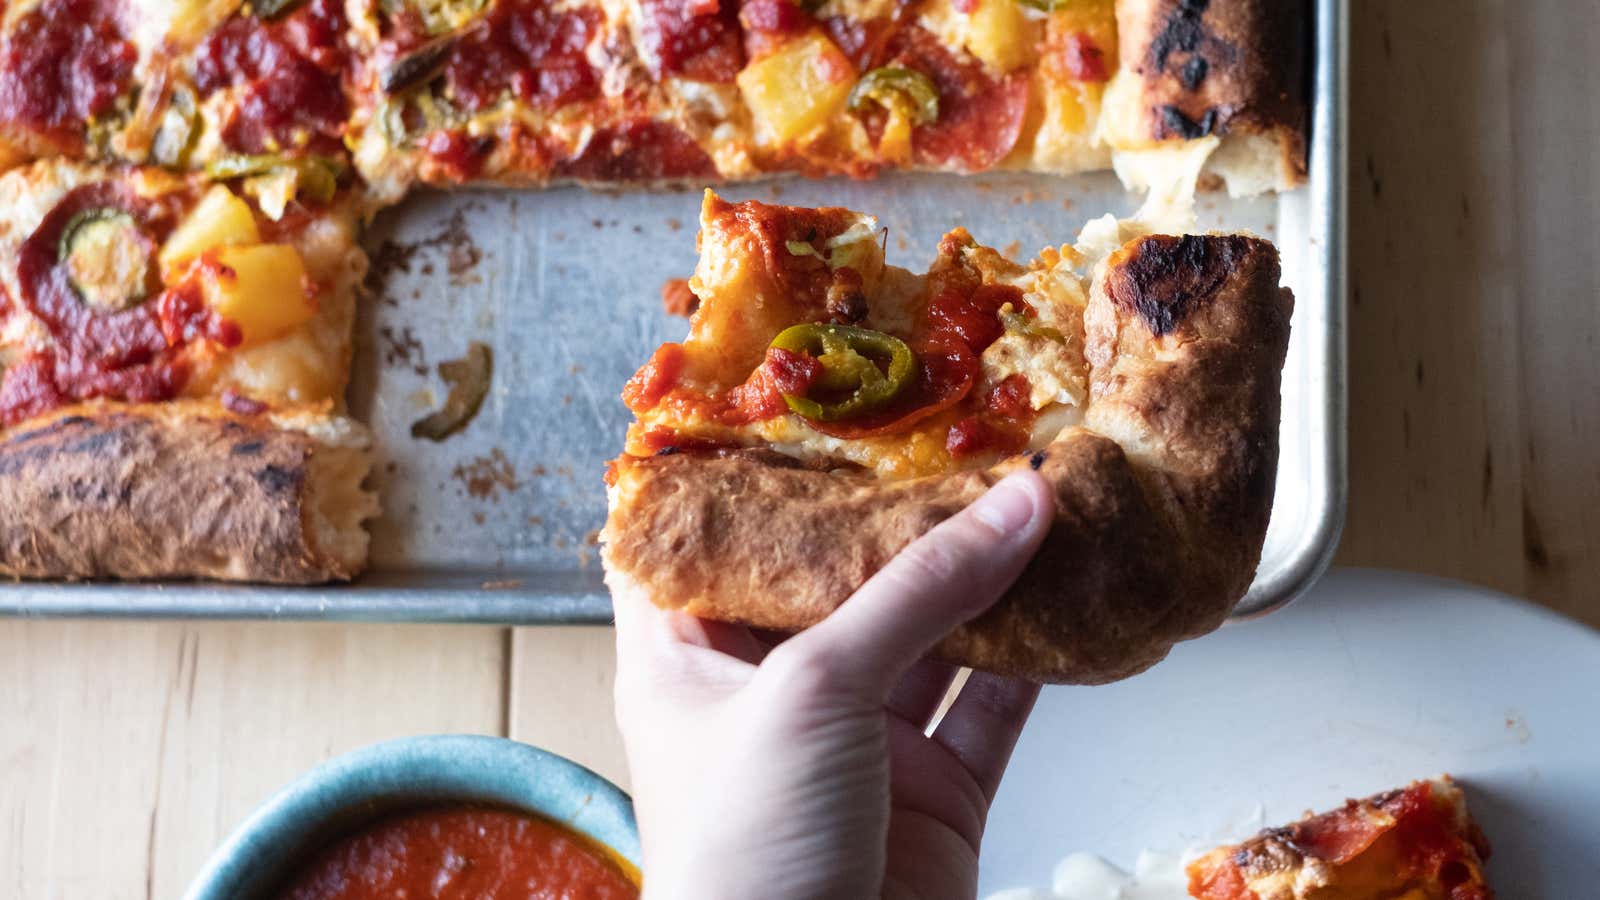 How to Make Your Own Stuffed Crust Pizza